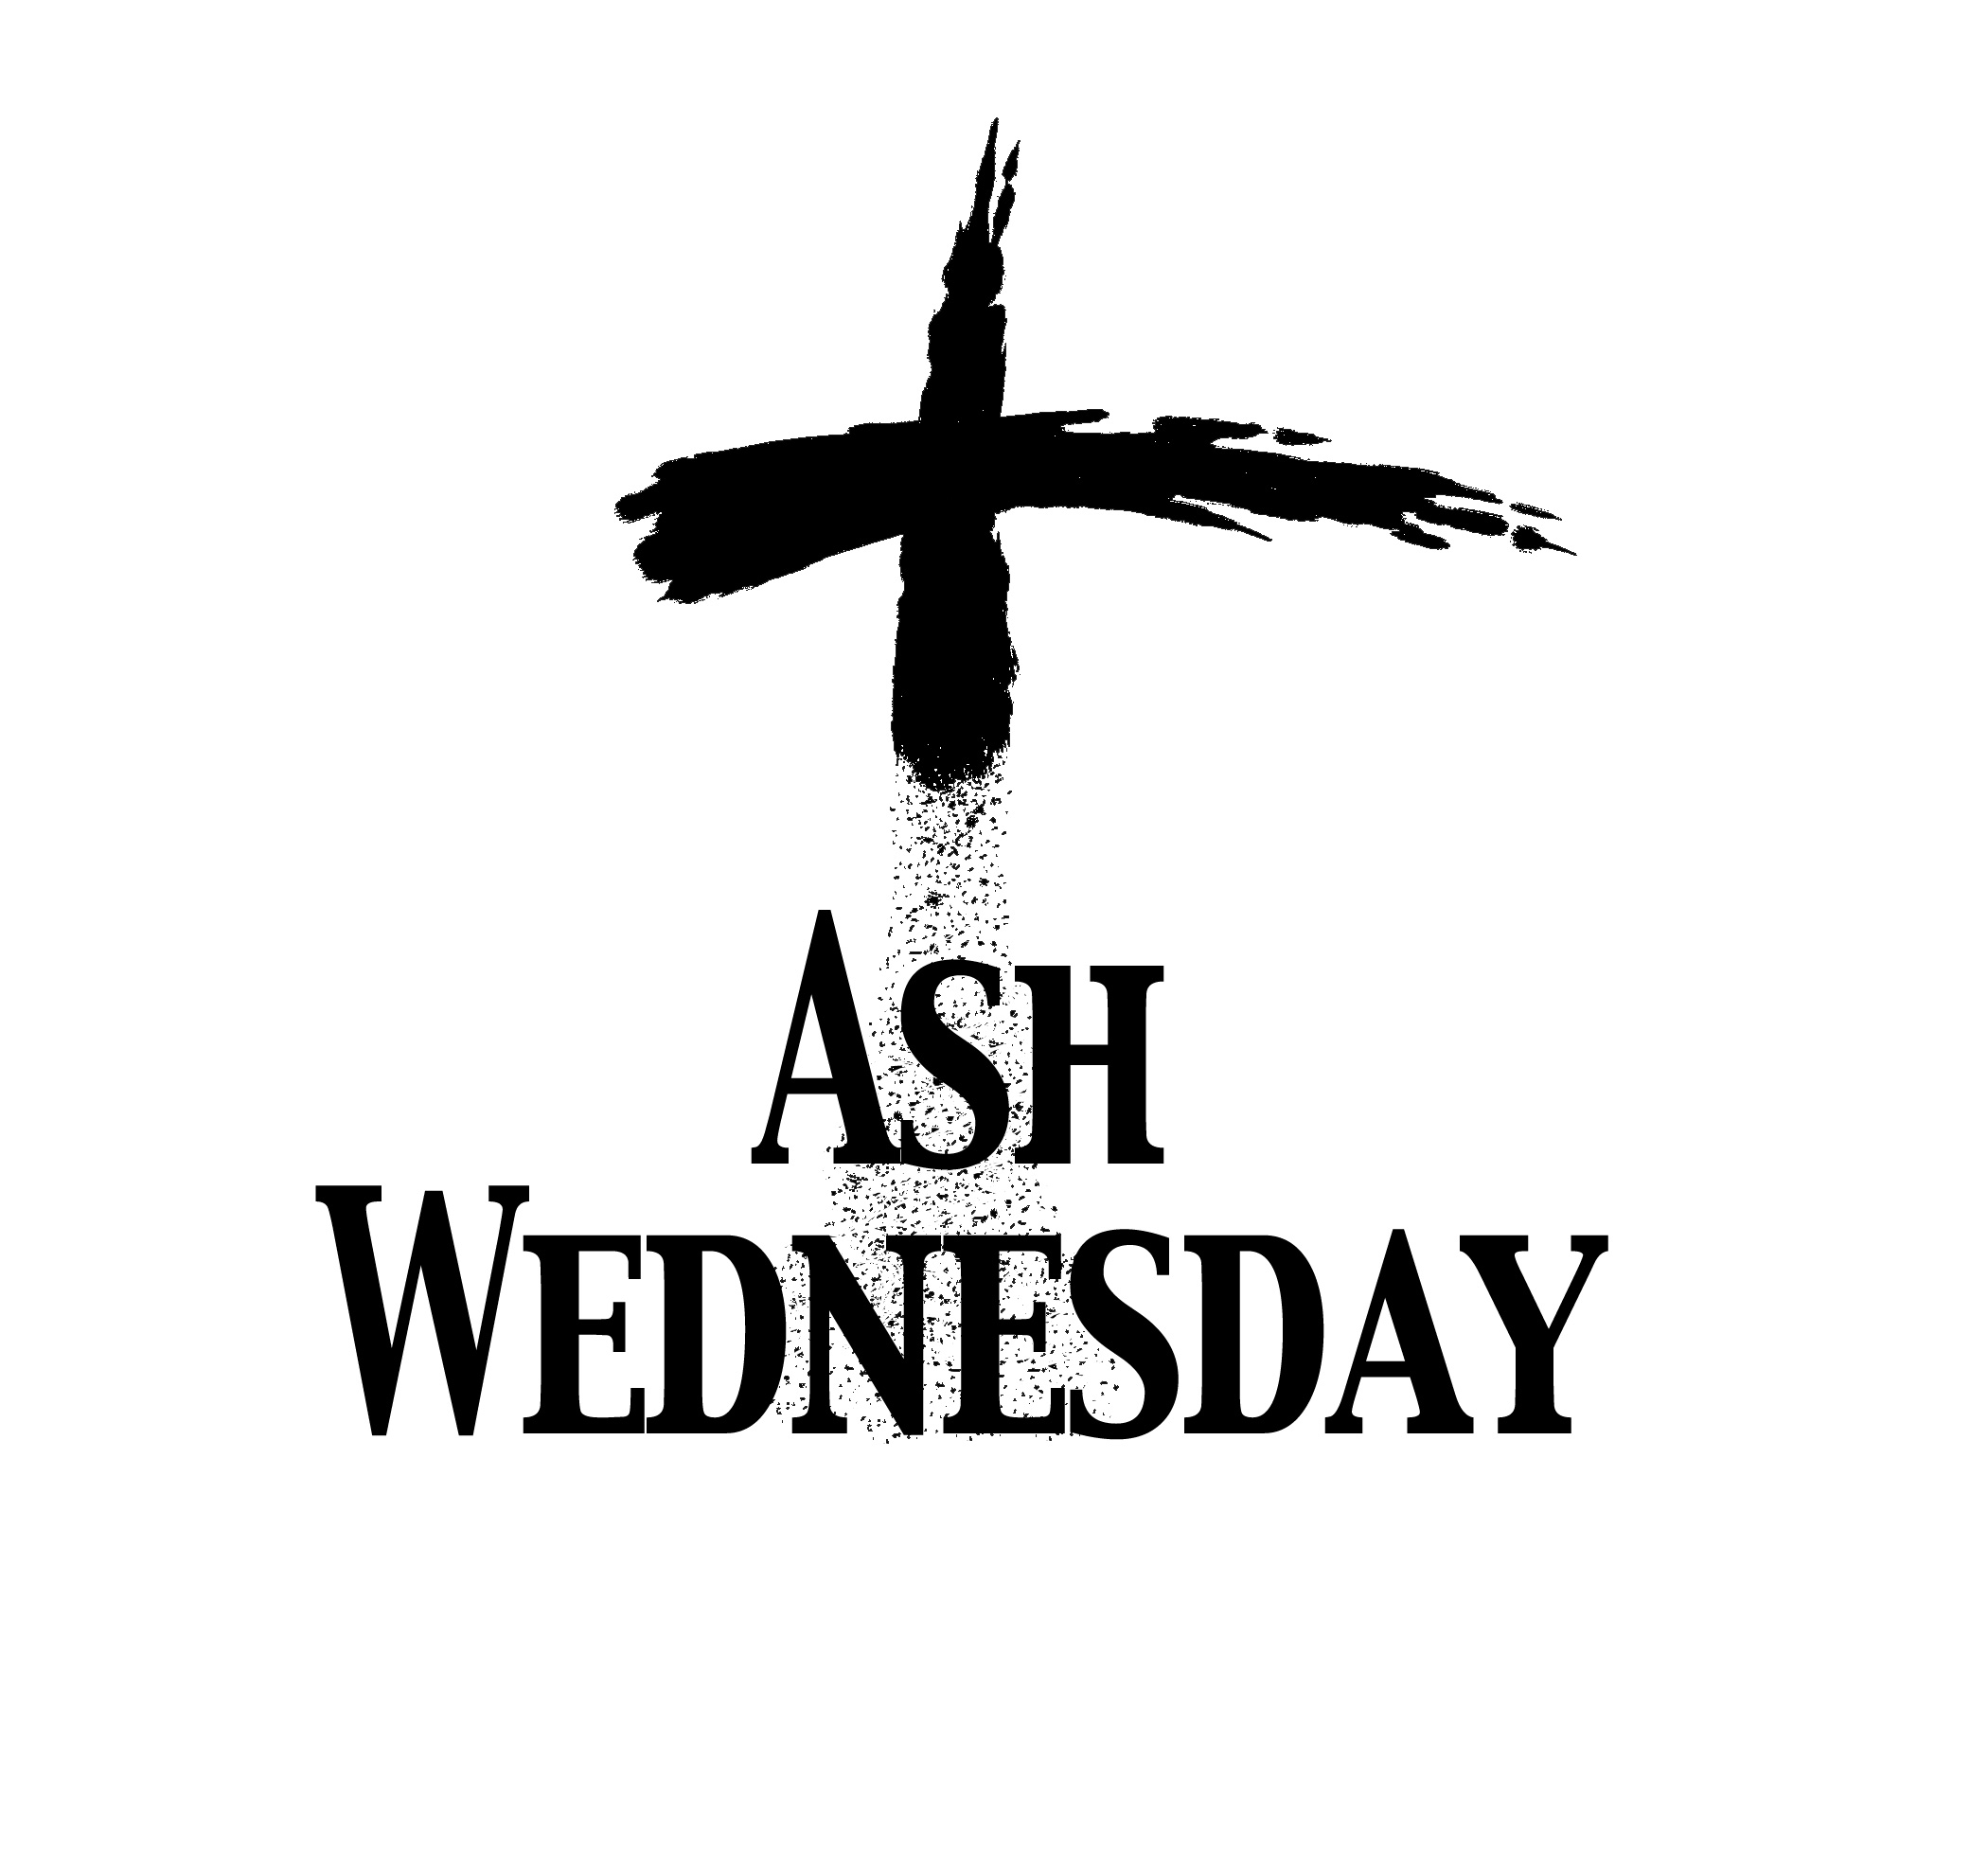 Ash Wednesday Homily, homily by Fr. James Walling, CPM